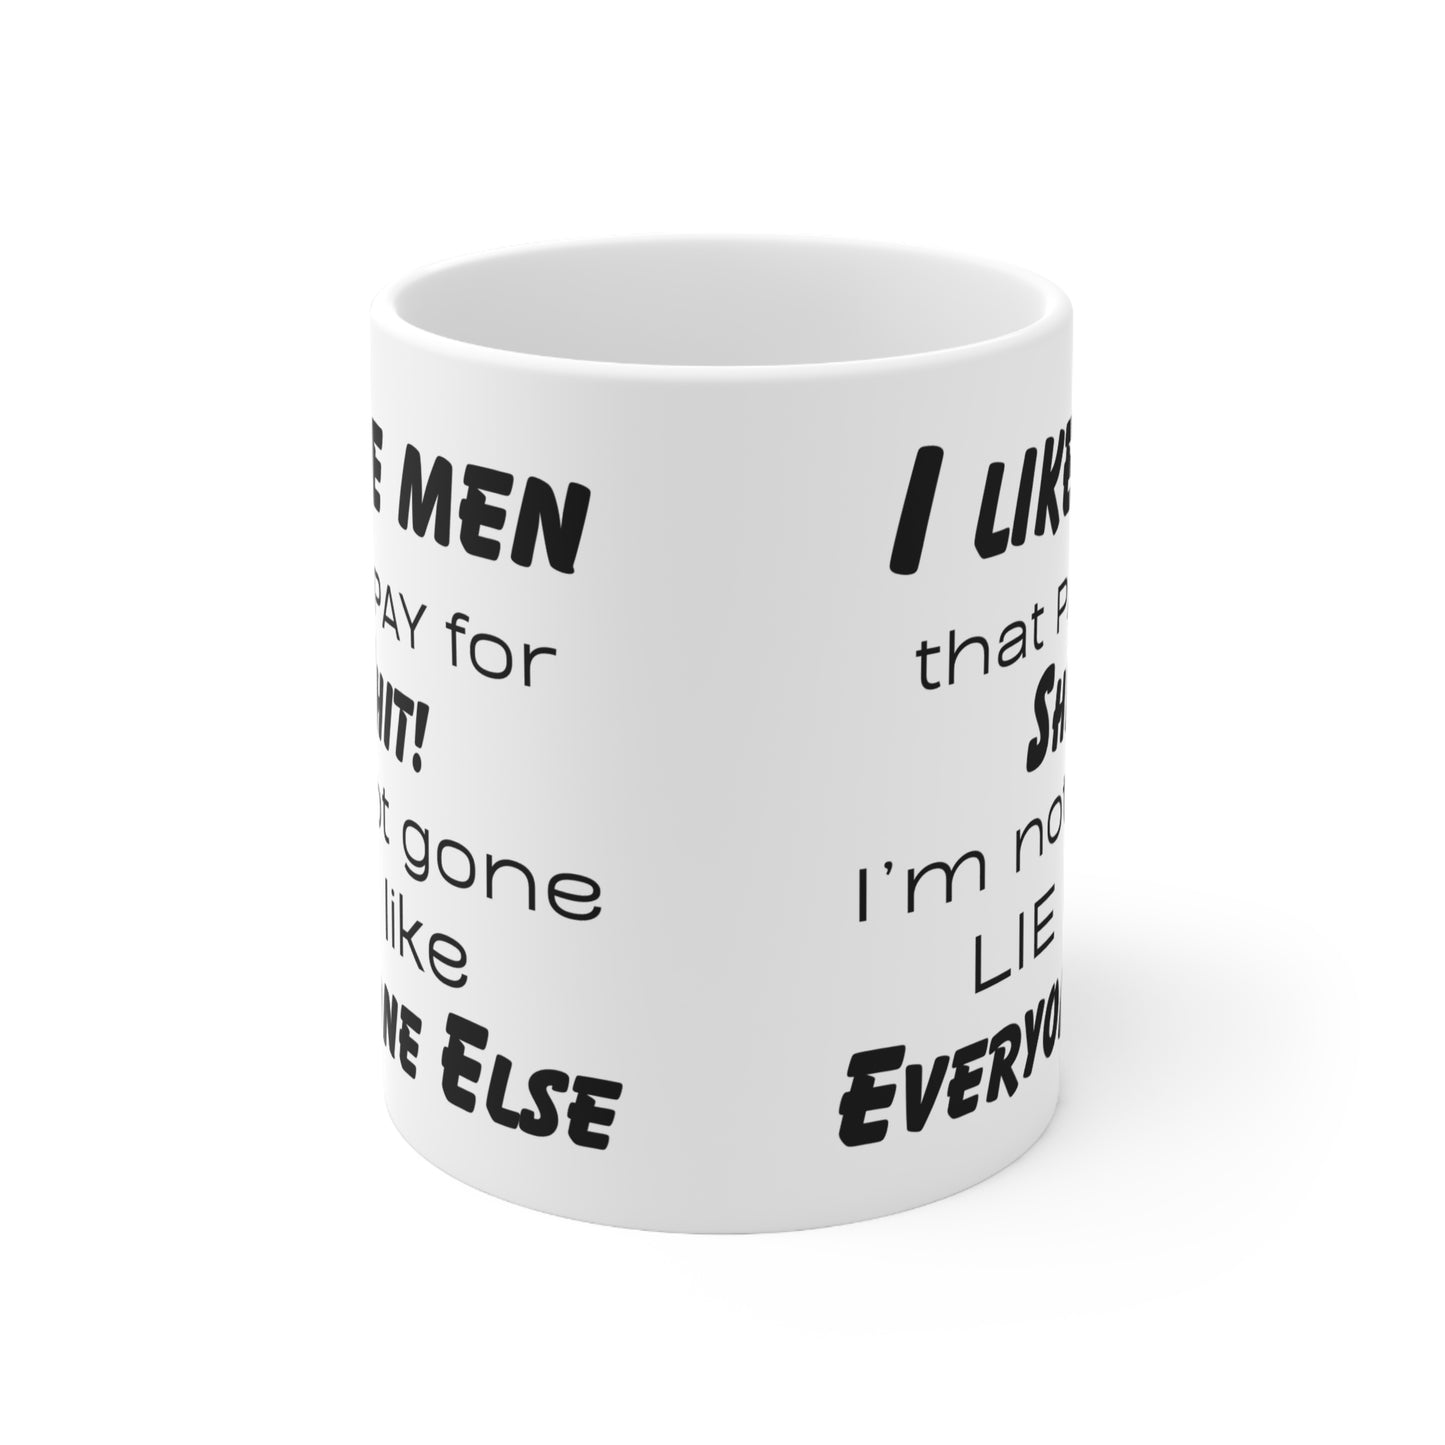 I like Men that pay for shit, I'm not gone lie like everyone else! Ceramic Coffee Cups, 11oz, 15oz